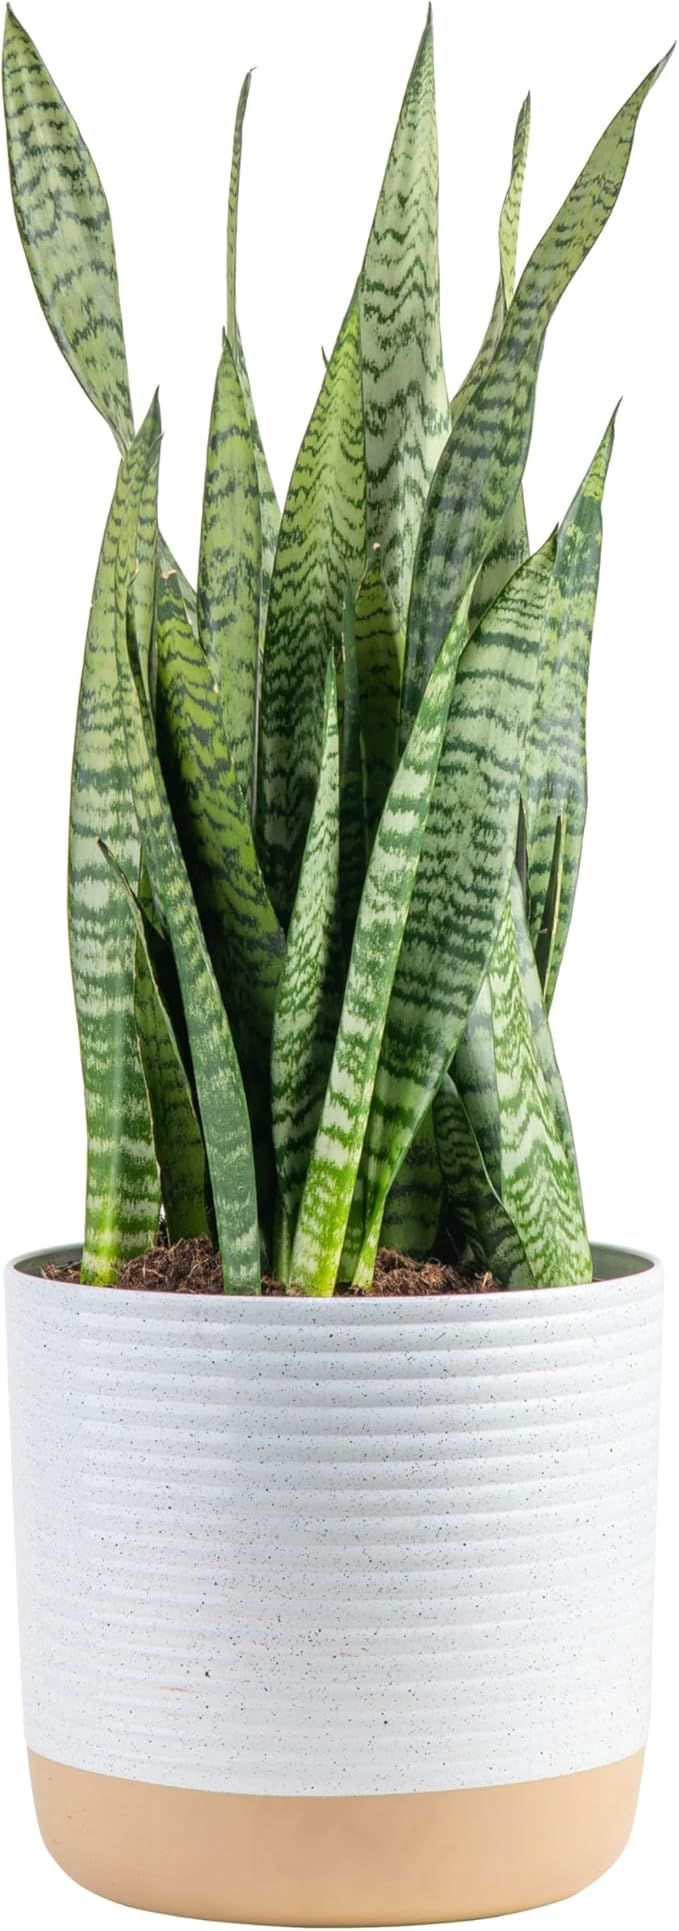 Costa Farms Snake Plant, Easy to Grow Live Indoor Houseplant in Indoors Plant Pot, Grower's Choic... | Amazon (US)